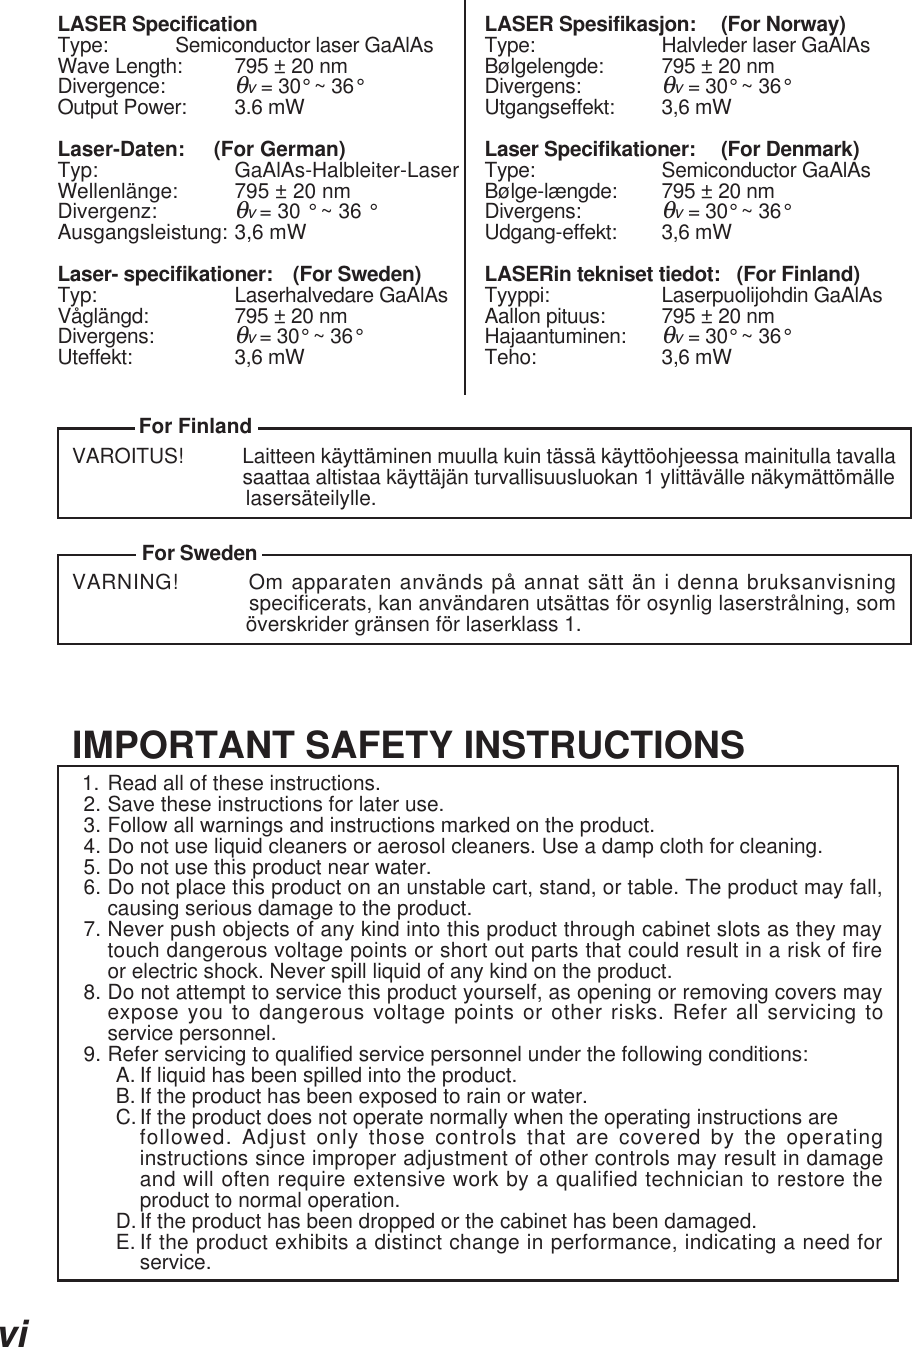 viIMPORTANT SAFETY INSTRUCTIONS  1. Read all of these instructions.  2. Save these instructions for later use.  3. Follow all warnings and instructions marked on the product.  4. Do not use liquid cleaners or aerosol cleaners. Use a damp cloth for cleaning.  5. Do not use this product near water.  6. Do not place this product on an unstable cart, stand, or table. The product may fall,causing serious damage to the product.  7. Never push objects of any kind into this product through cabinet slots as they maytouch dangerous voltage points or short out parts that could result in a risk of fireor electric shock. Never spill liquid of any kind on the product.  8. Do not attempt to service this product yourself, as opening or removing covers mayexpose you to dangerous voltage points or other risks. Refer all servicing toservice personnel.  9. Refer servicing to qualified service personnel under the following conditions:A. If liquid has been spilled into the product.B. If the product has been exposed to rain or water.C.If the product does not operate normally when the operating instructions arefollowed. Adjust only those controls that are covered by the operatinginstructions since improper adjustment of other controls may result in damageand will often require extensive work by a qualified technician to restore theproduct to normal operation.D.If the product has been dropped or the cabinet has been damaged.E. If the product exhibits a distinct change in performance, indicating a need forservice.LASER Spesifikasjon: (For Norway)Type: Halvleder laser GaAlAsBølgelengde: 795 ± 20 nmDivergens:θv = 30° ~ 36°Utgangseffekt: 3,6 mWLaser Specifikationer: (For Denmark)Type: Semiconductor GaAlAsBølge-længde: 795 ± 20 nmDivergens:θv = 30° ~ 36°Udgang-effekt: 3,6 mWLASERin tekniset tiedot:   (For Finland)Tyyppi: Laserpuolijohdin GaAlAsAallon pituus: 795 ± 20 nmHajaantuminen:θv = 30° ~ 36°Teho: 3,6 mWLASER SpecificationType: Semiconductor laser GaAlAsWave Length: 795 ± 20 nmDivergence:θv = 30° ~ 36°Output Power: 3.6 mWLaser-Daten:     (For German)Typ: GaAlAs-Halbleiter-LaserWellenlänge: 795 ± 20 nmDivergenz:θv = 30 ° ~ 36 °Ausgangsleistung: 3,6 mWLaser- specifikationer: (For Sweden)Typ: Laserhalvedare GaAlAsVåglängd: 795 ± 20 nmDivergens:θv = 30° ~ 36°Uteffekt: 3,6 mWVAROITUS!           Laitteen käyttäminen muulla kuin tässä käyttöohjeessa mainitulla tavalla                               saattaa altistaa käyttäjän turvallisuusluokan 1 ylittävälle näkymättömälle                              lasersäteilylle.VARNING!         Om apparaten används på annat sätt än i denna bruksanvisning                             specificerats, kan användaren utsättas för osynlig laserstrålning, som                              överskrider gränsen för laserklass 1.For FinlandFor Sweden